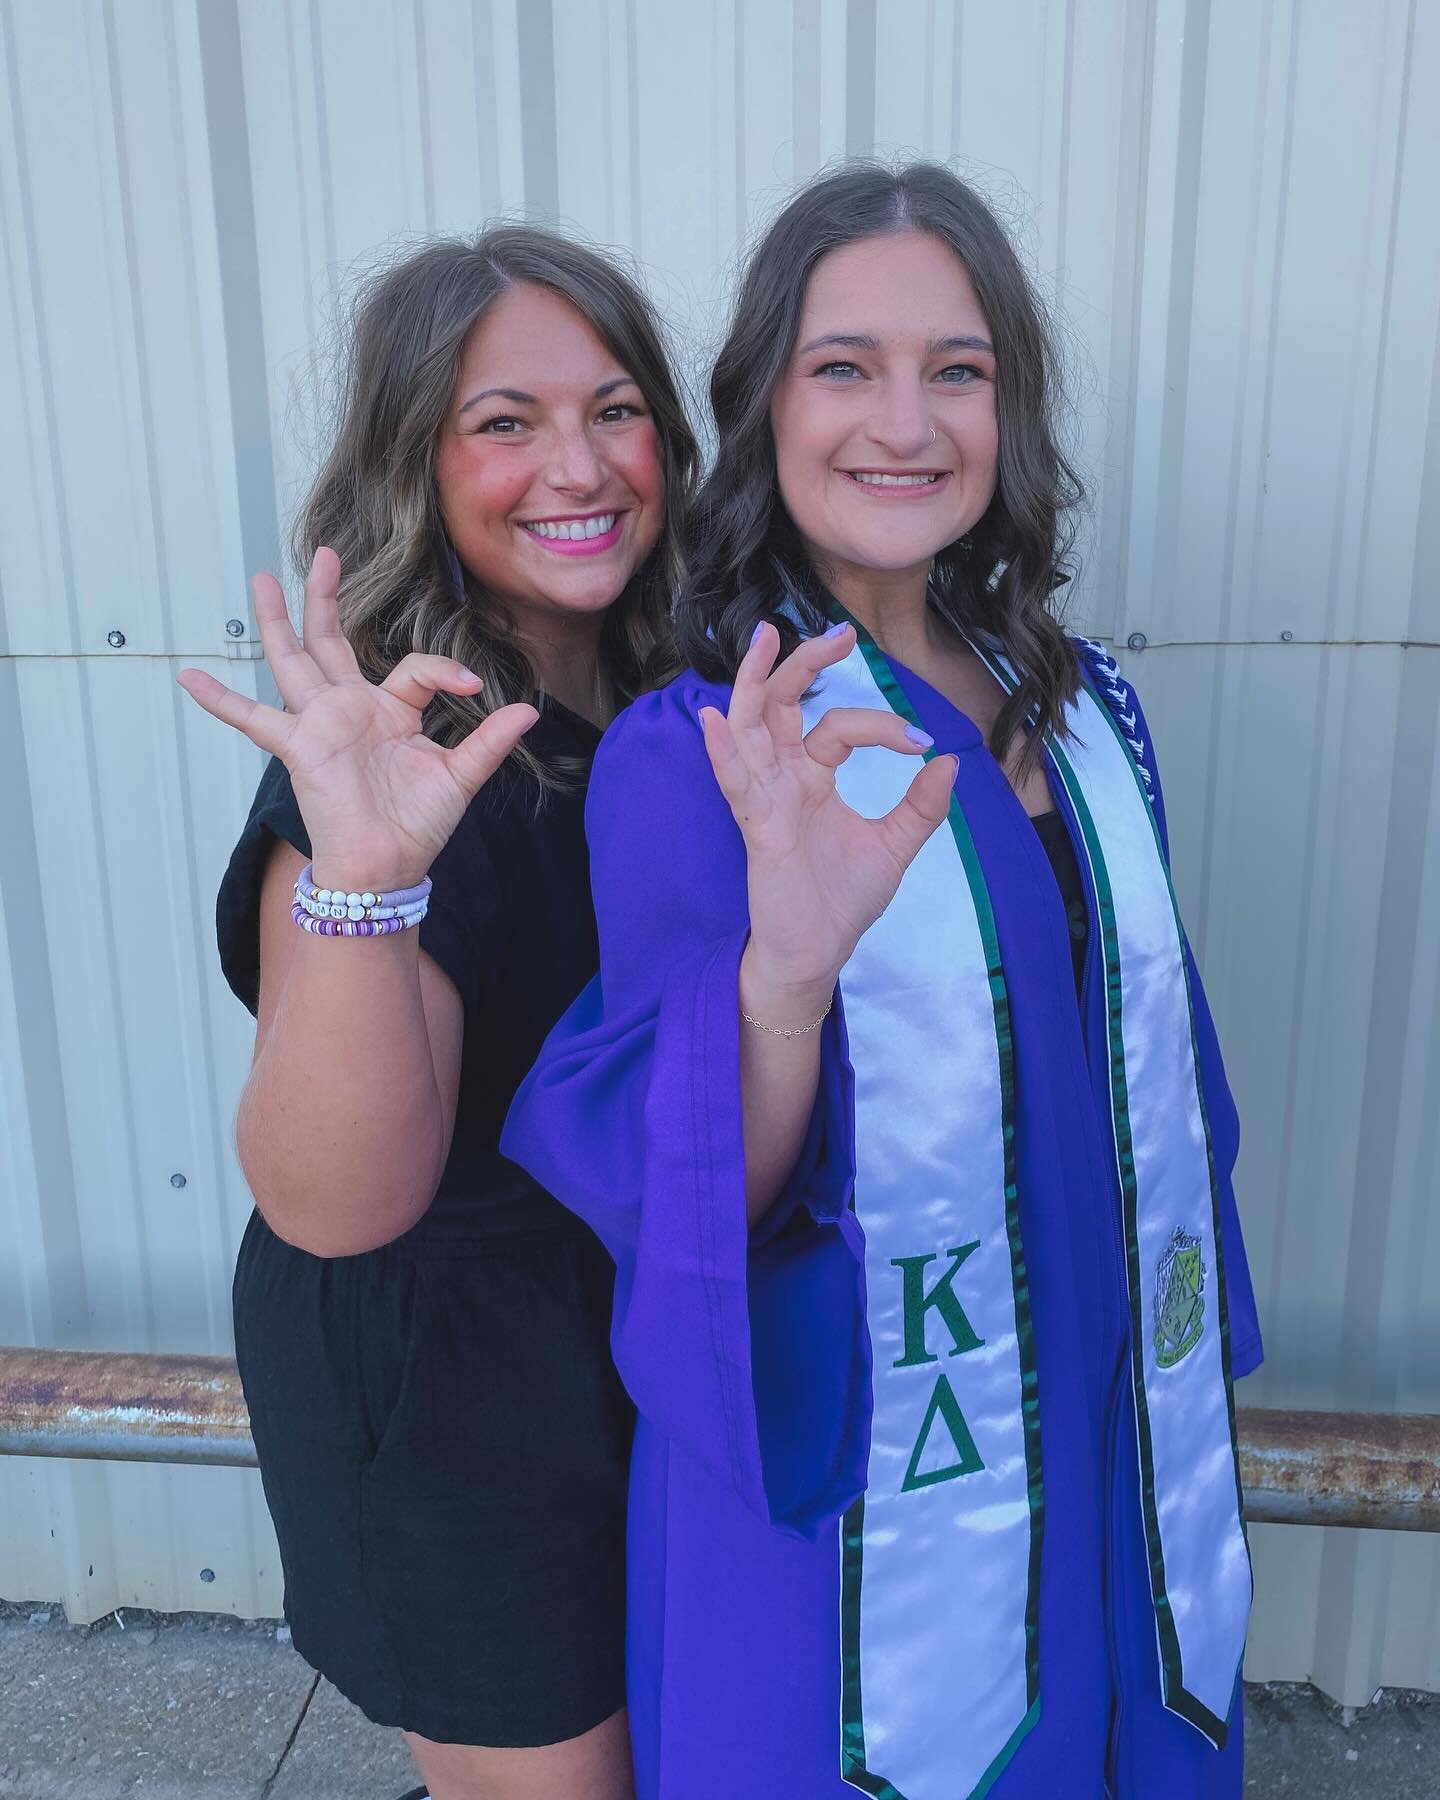 Welcome to the Kansas State University Alumni fam, sweet B!!! 💜 So proud of you!